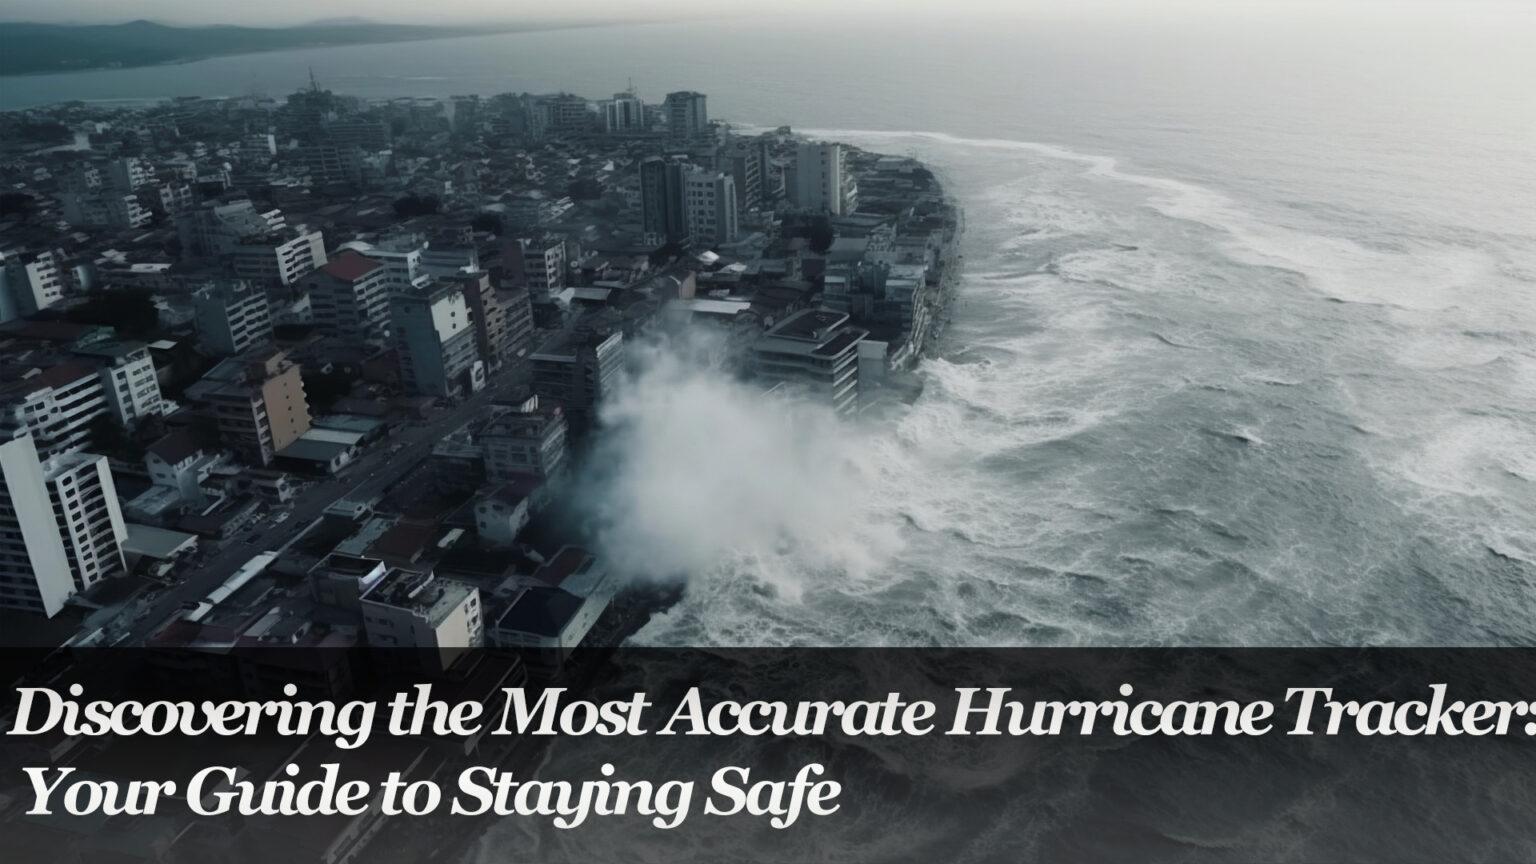 what is the most accurate hurricane tracker?